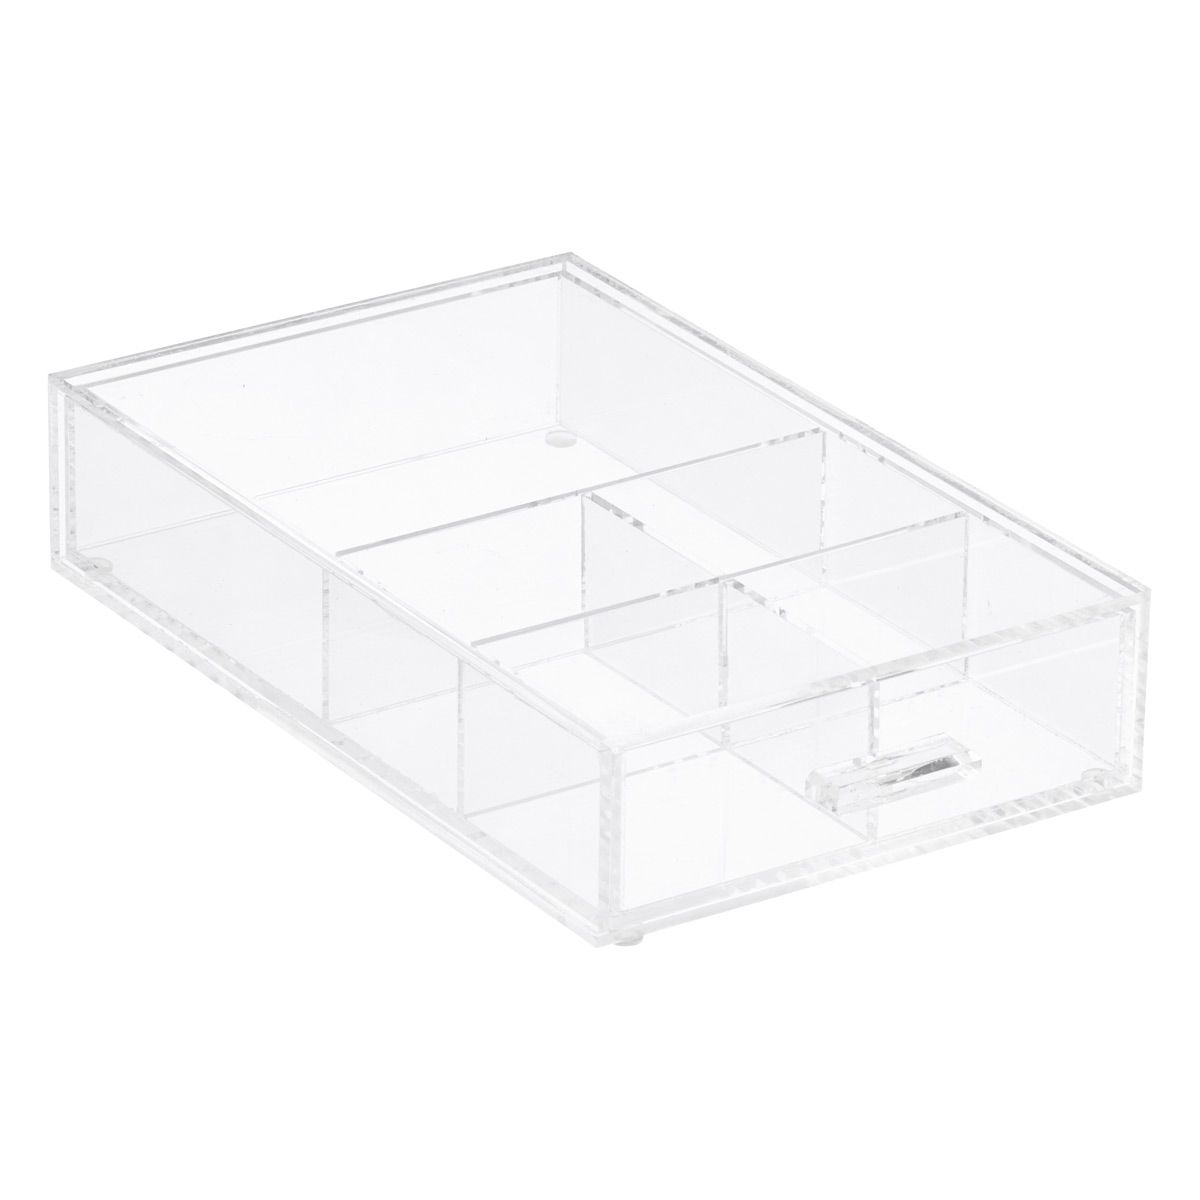 Acrylic Accessory Drawer | The Container Store